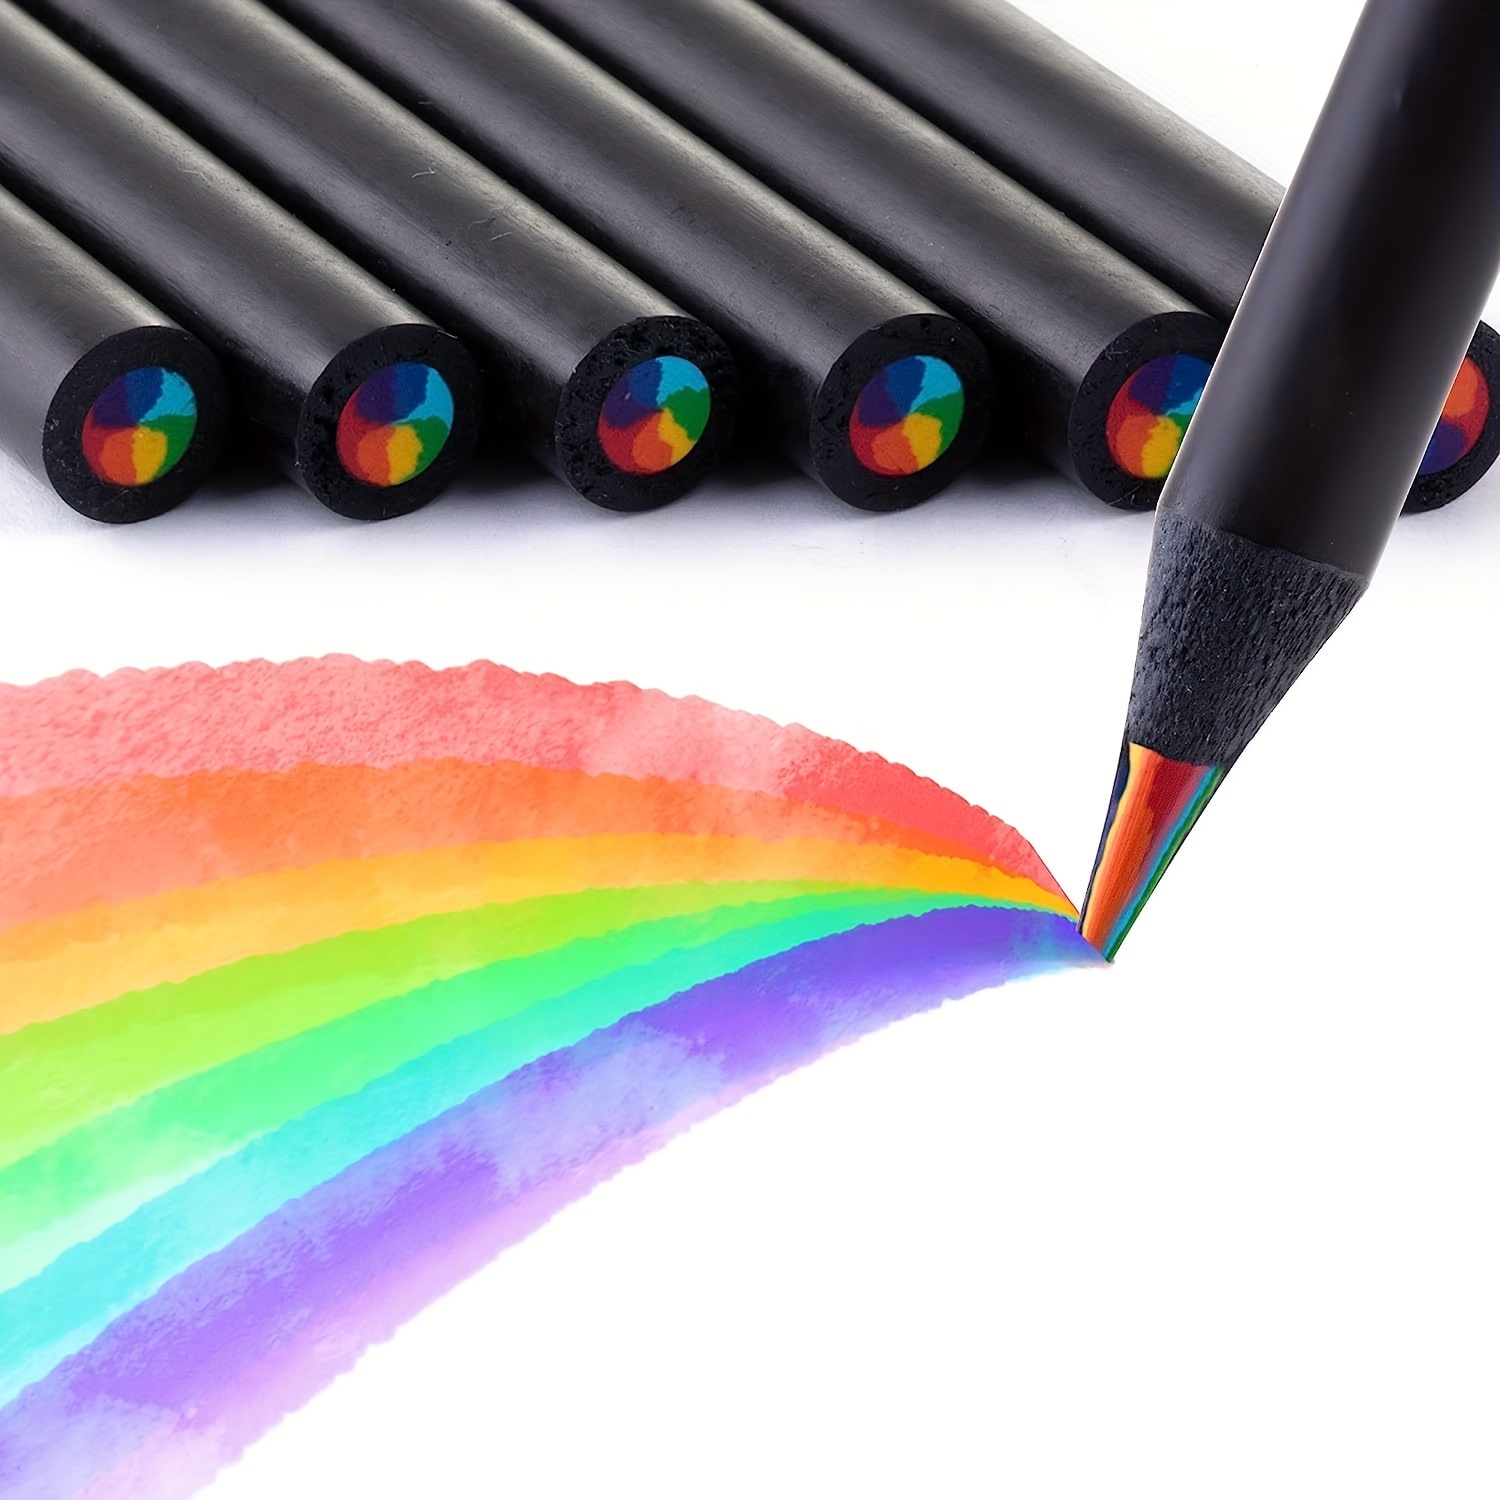 Hapikalor 12-Color Rainbow Pencils Aesthetic Jumbo Colored Pencils for  Adult Coloring Sketching Drawing, Cute Drawing Kit Fun Pencils Cool Gifts  Stuff